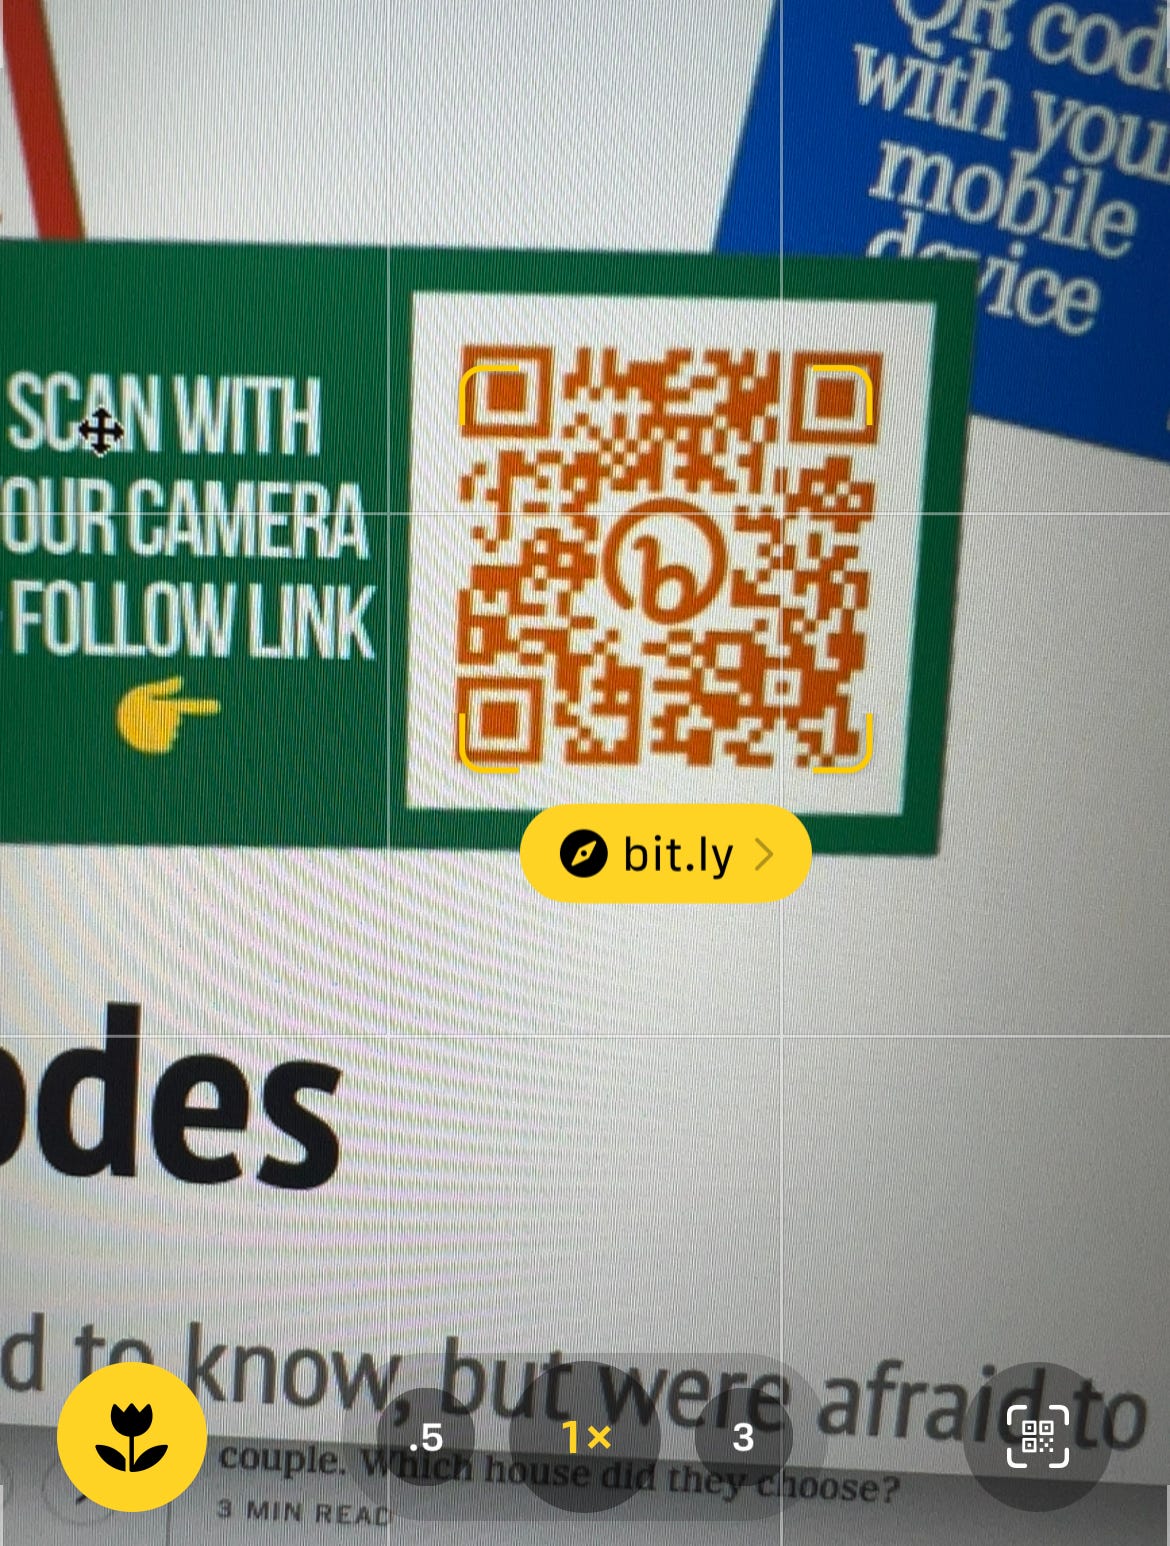 A QR code when viewed from the camera interface on an iPhone. Tap the yellow text to follow the link.